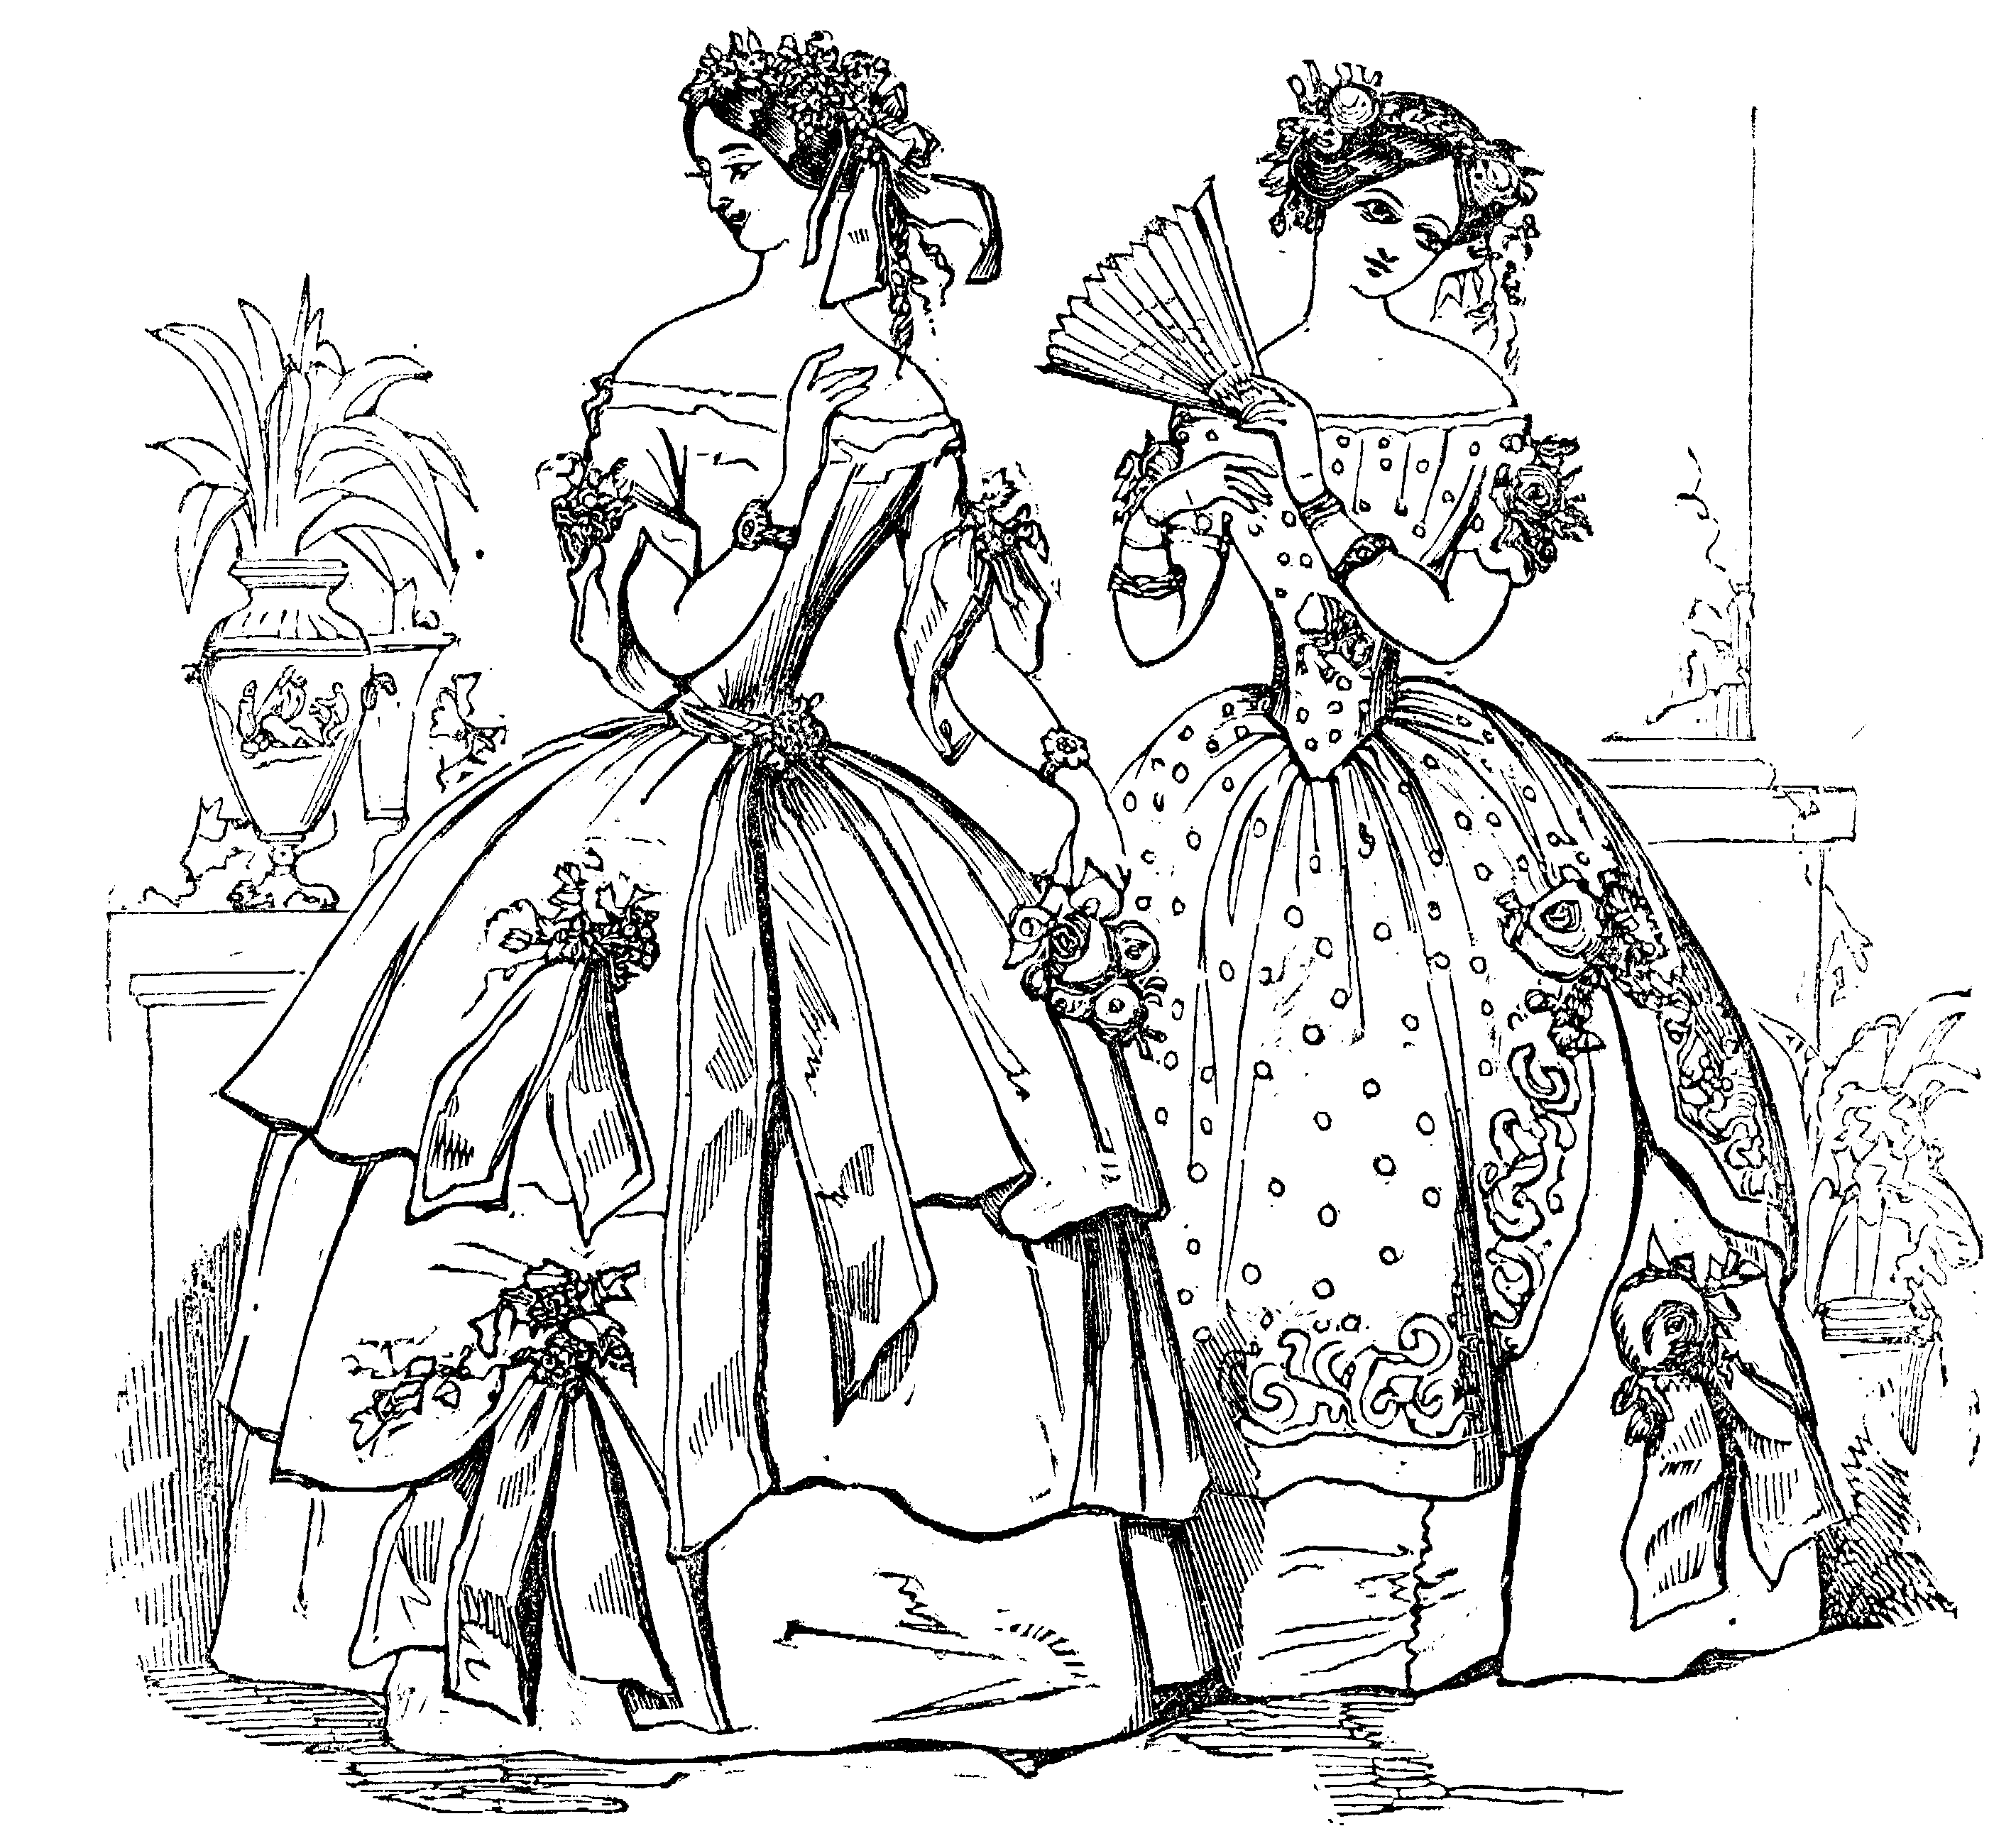 Two fashionable ladies, one with fan